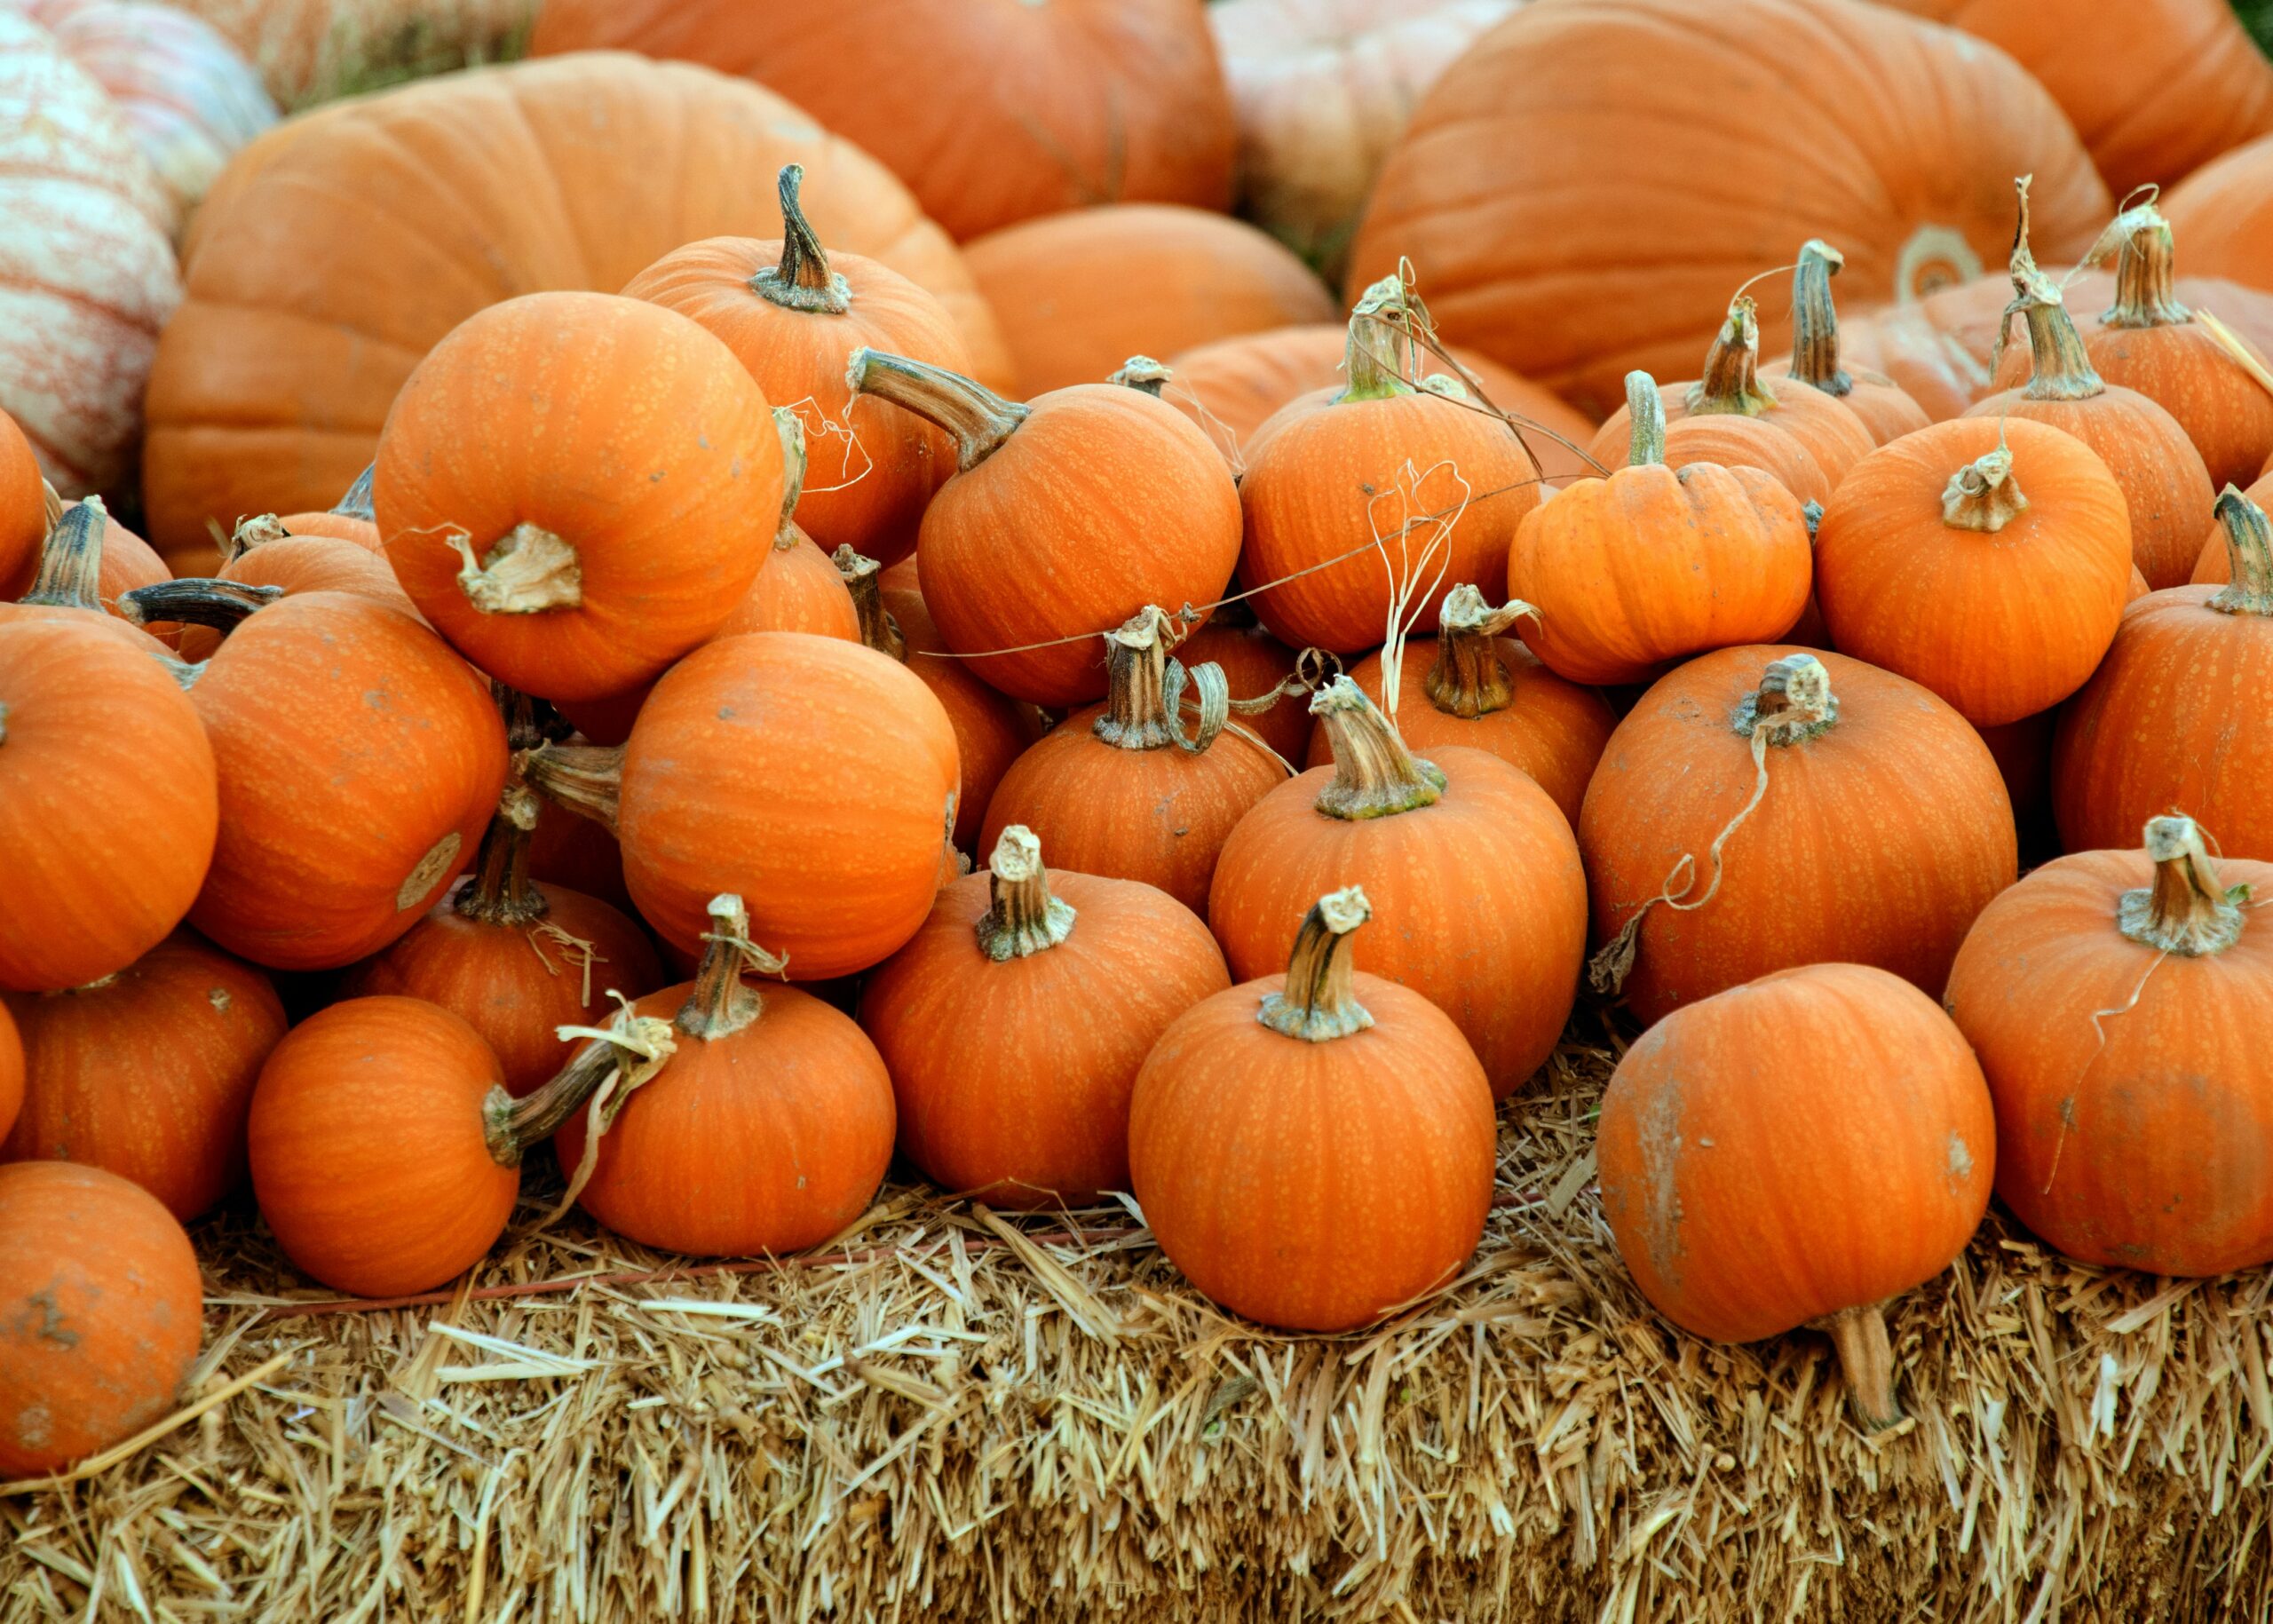 Travelers should go to San Diego during fall.
Pictured: pumpkins in San Diego